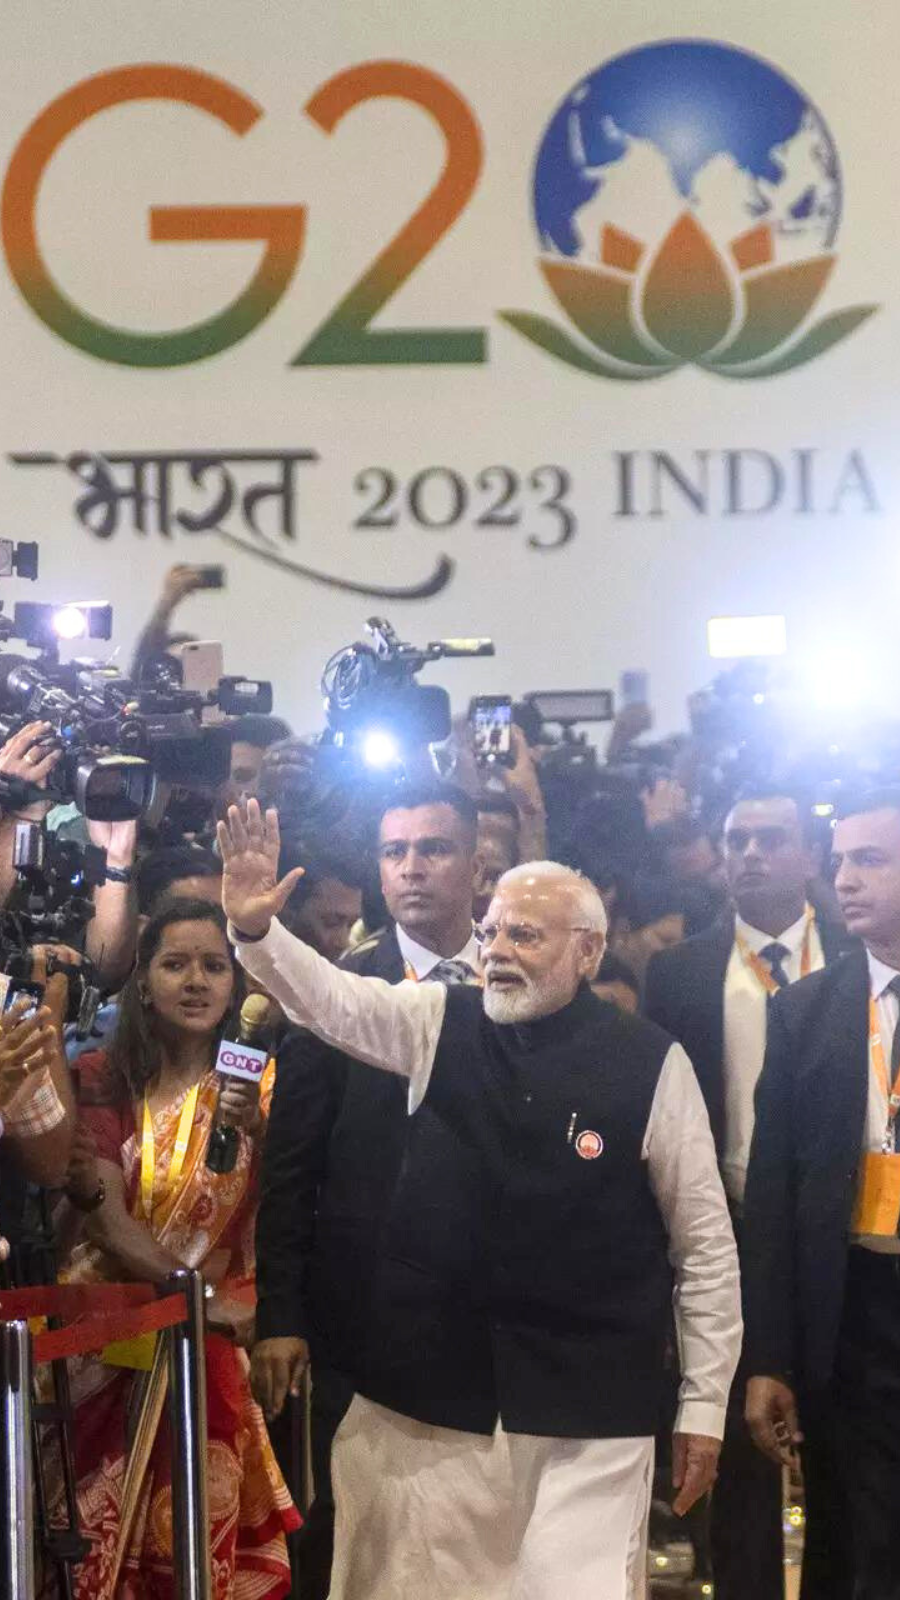 G20 Summit: India spends Rs 4,100 cr; Check how much other hosts spent in the past